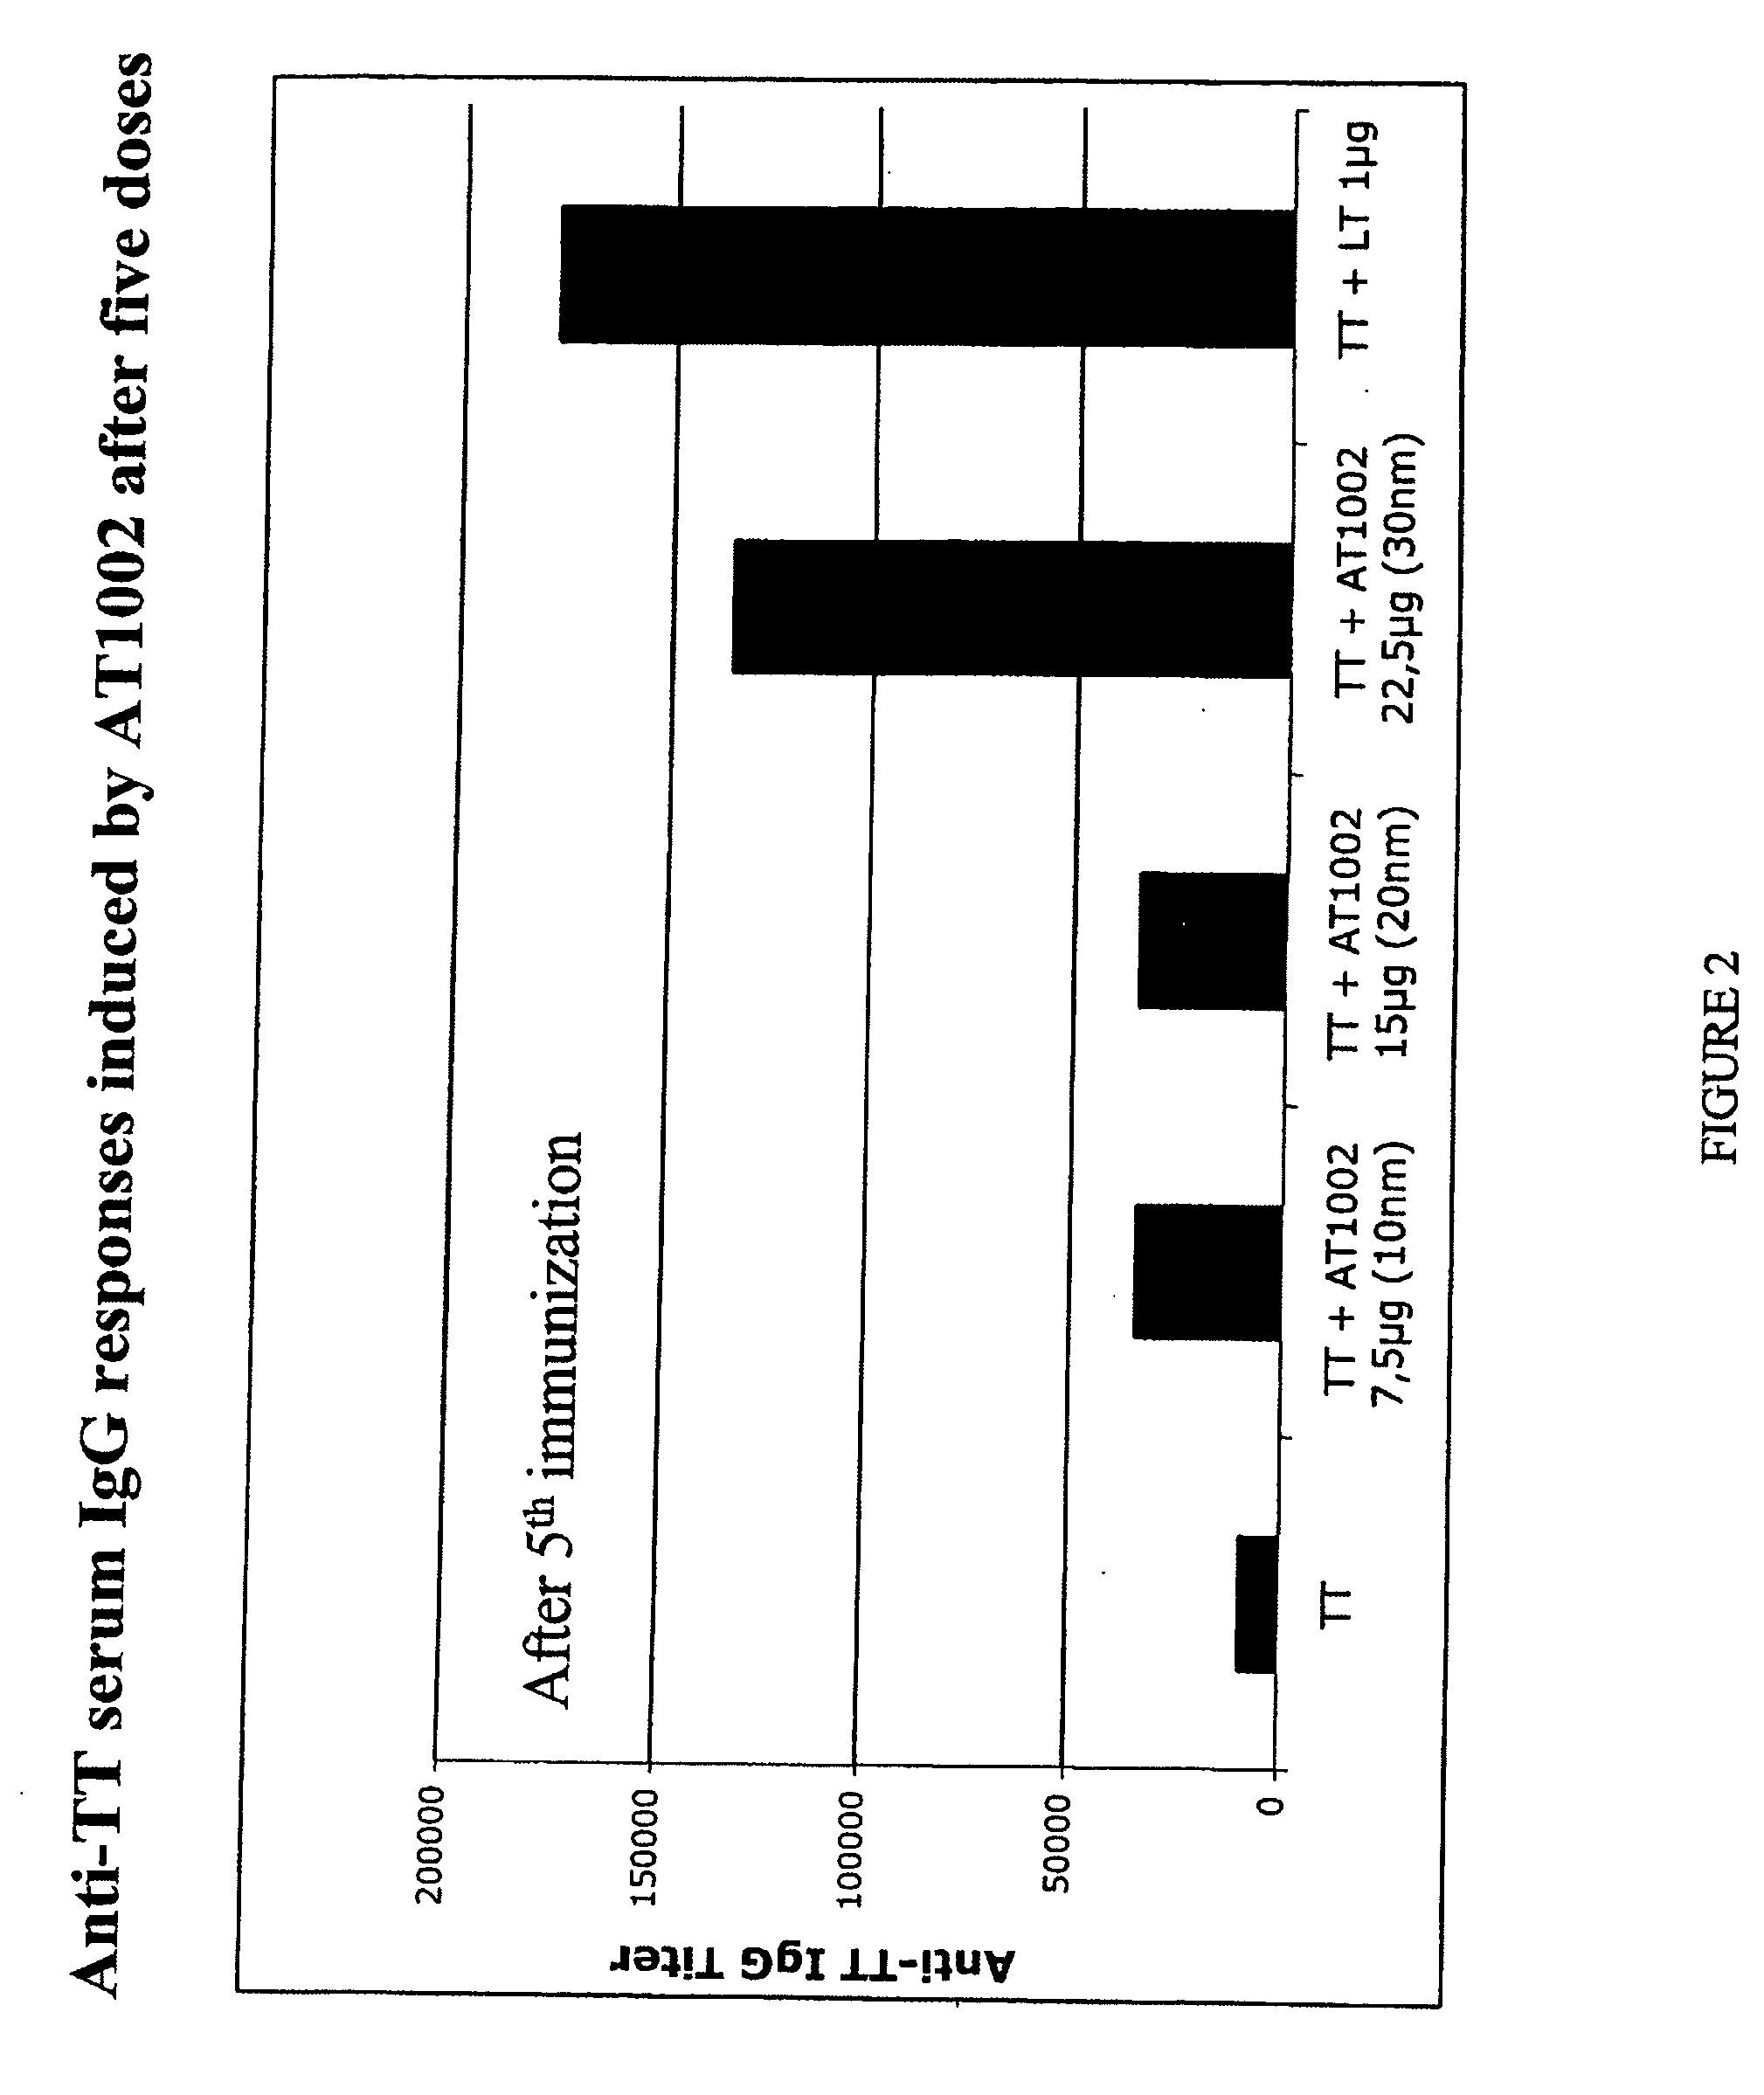 Peptides for delivery of mucosal vaccines